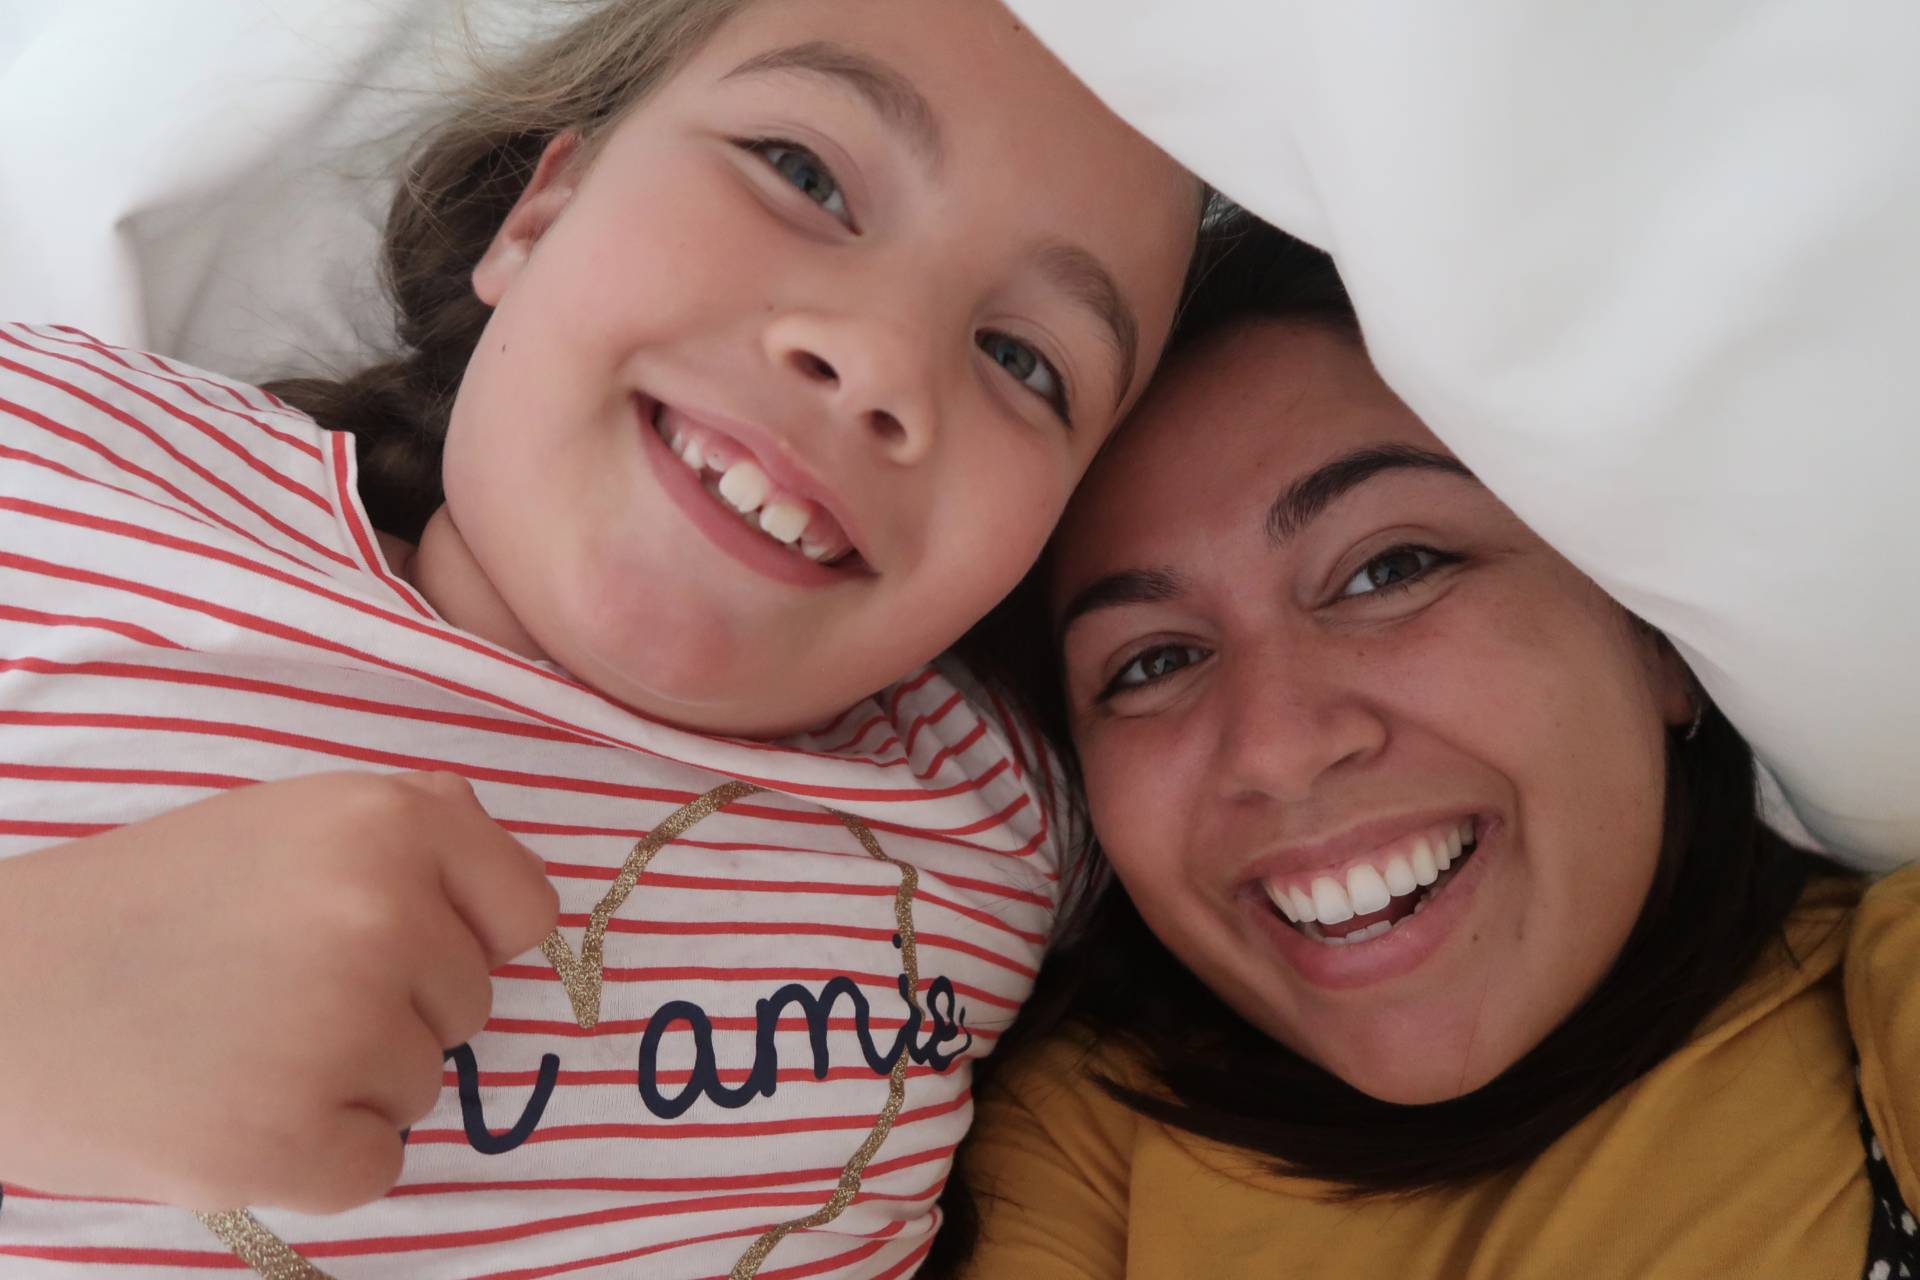 mother and daughter smiling under the bed covers